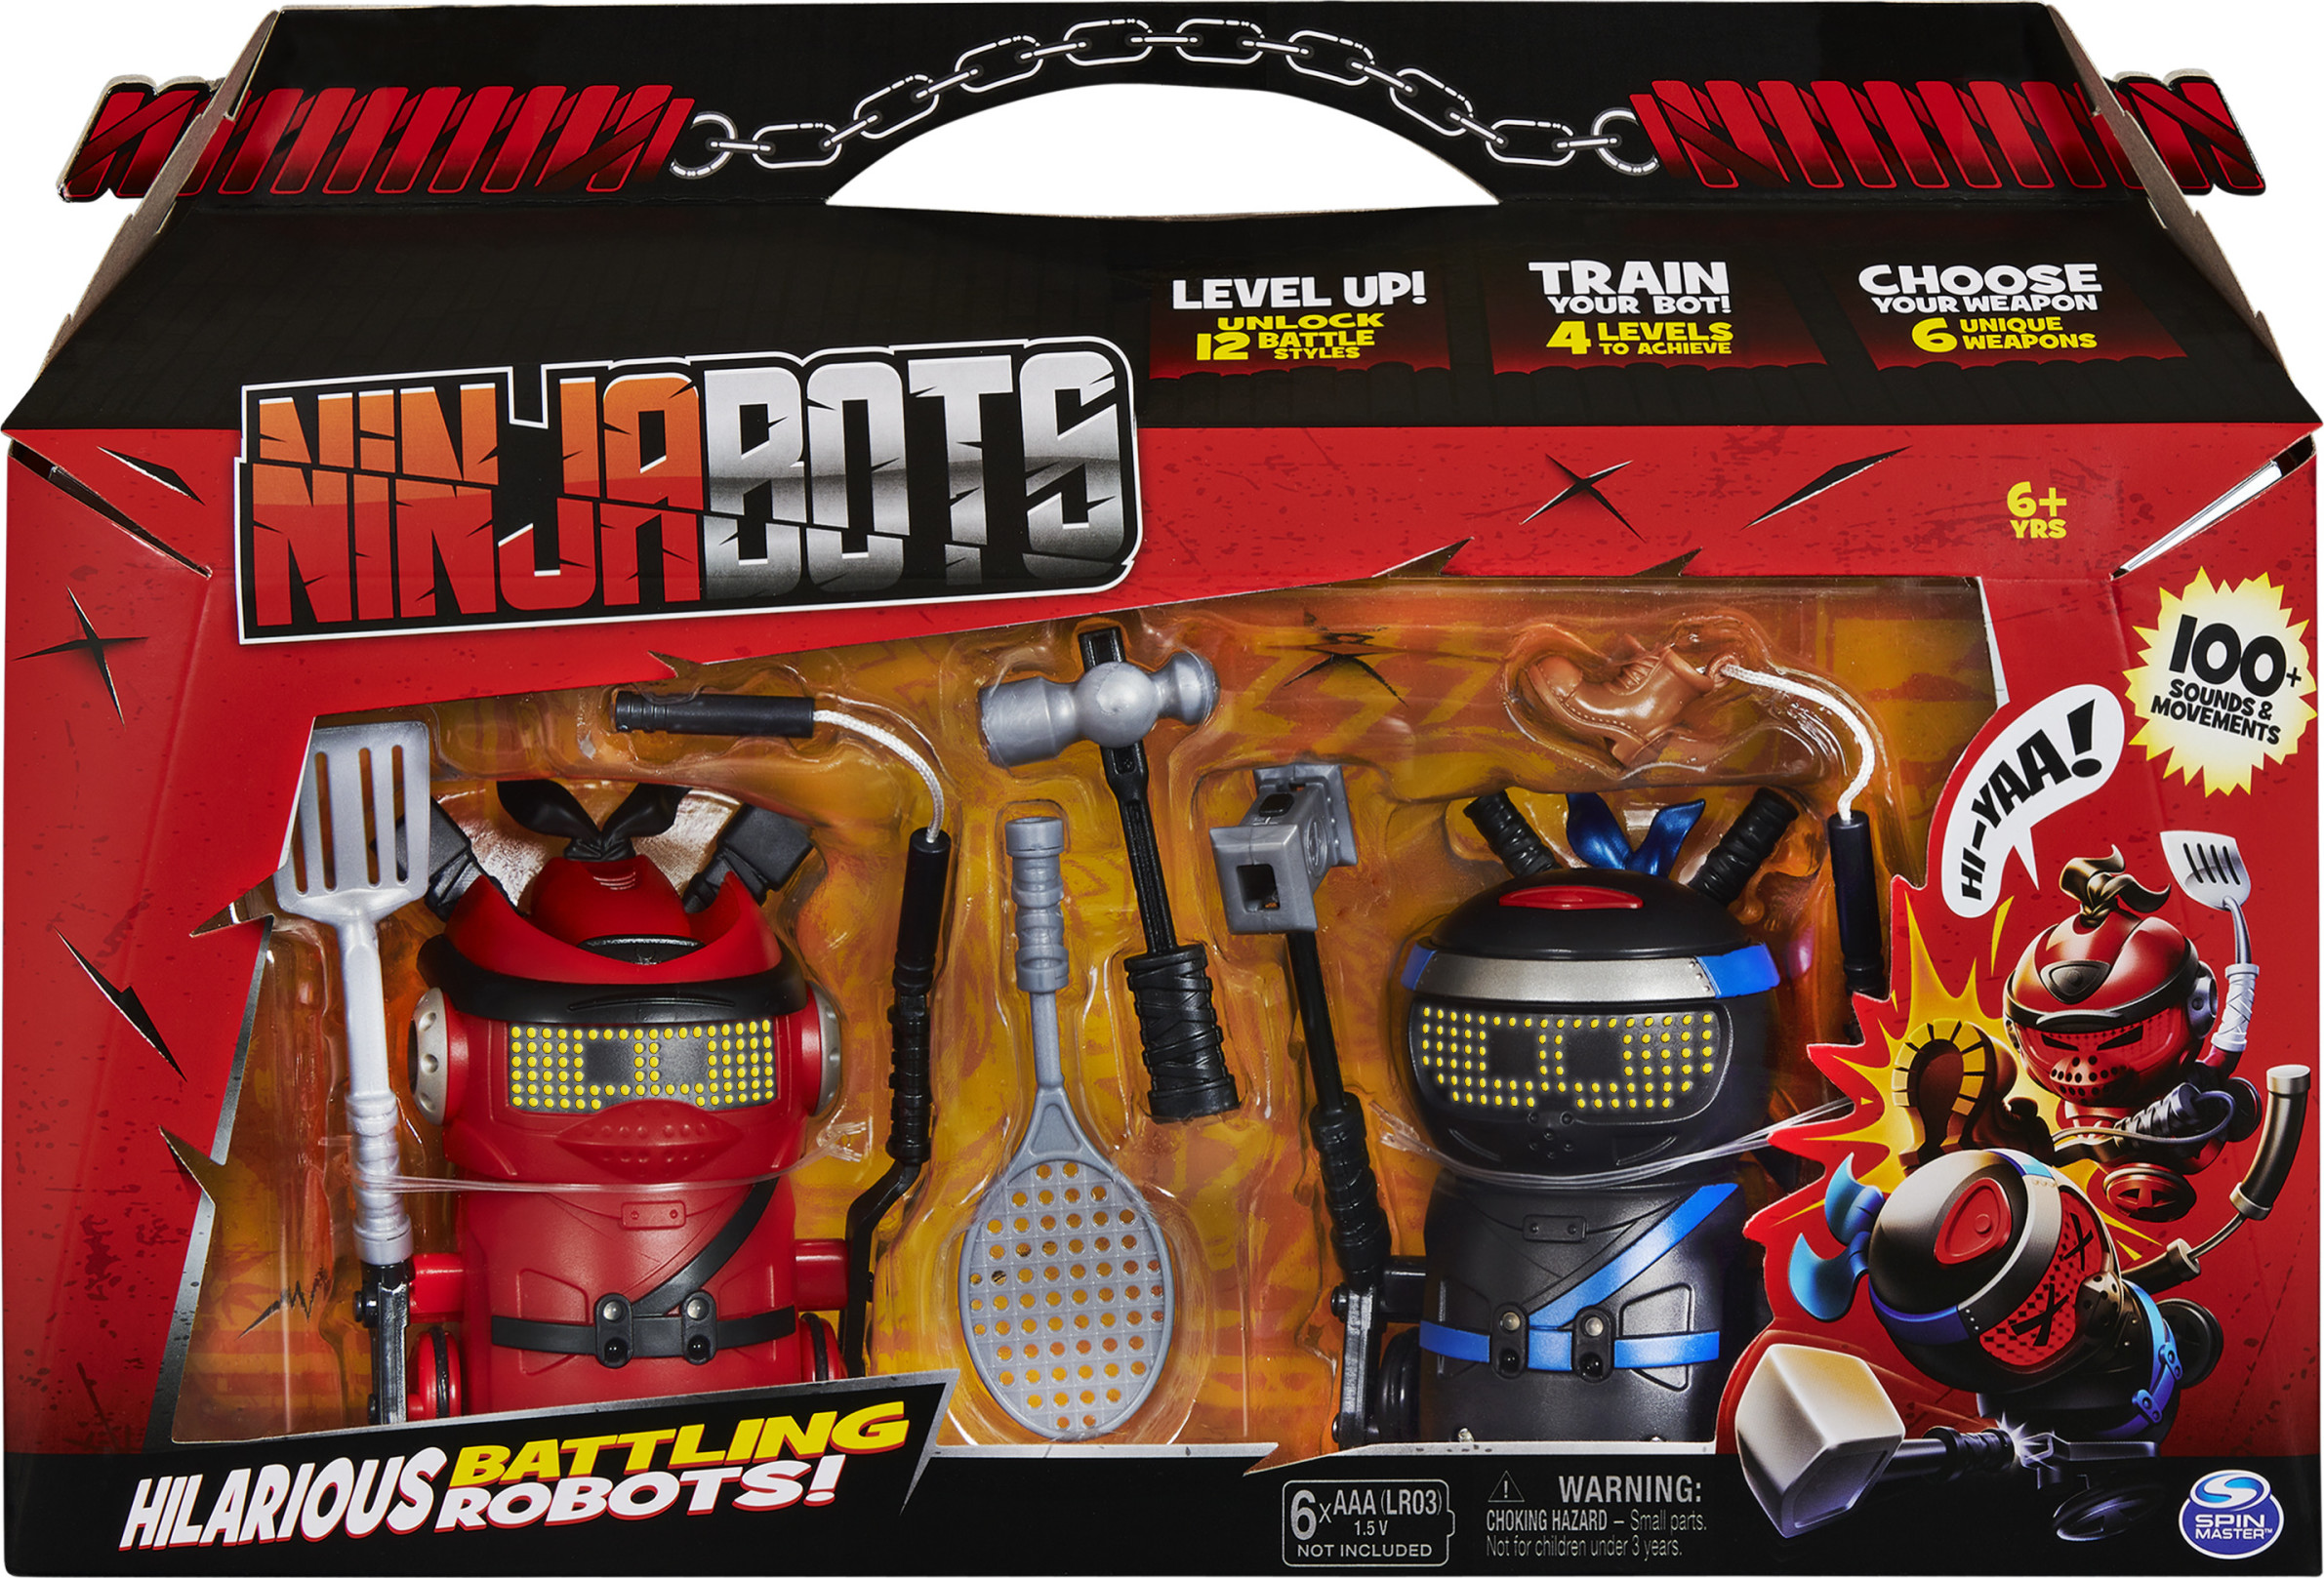 Ninja Bots 2-Pack, Hilarious Battling Robots (Red/Black) with 6 Weapons and Over 100 Sounds and Movements - image 3 of 9